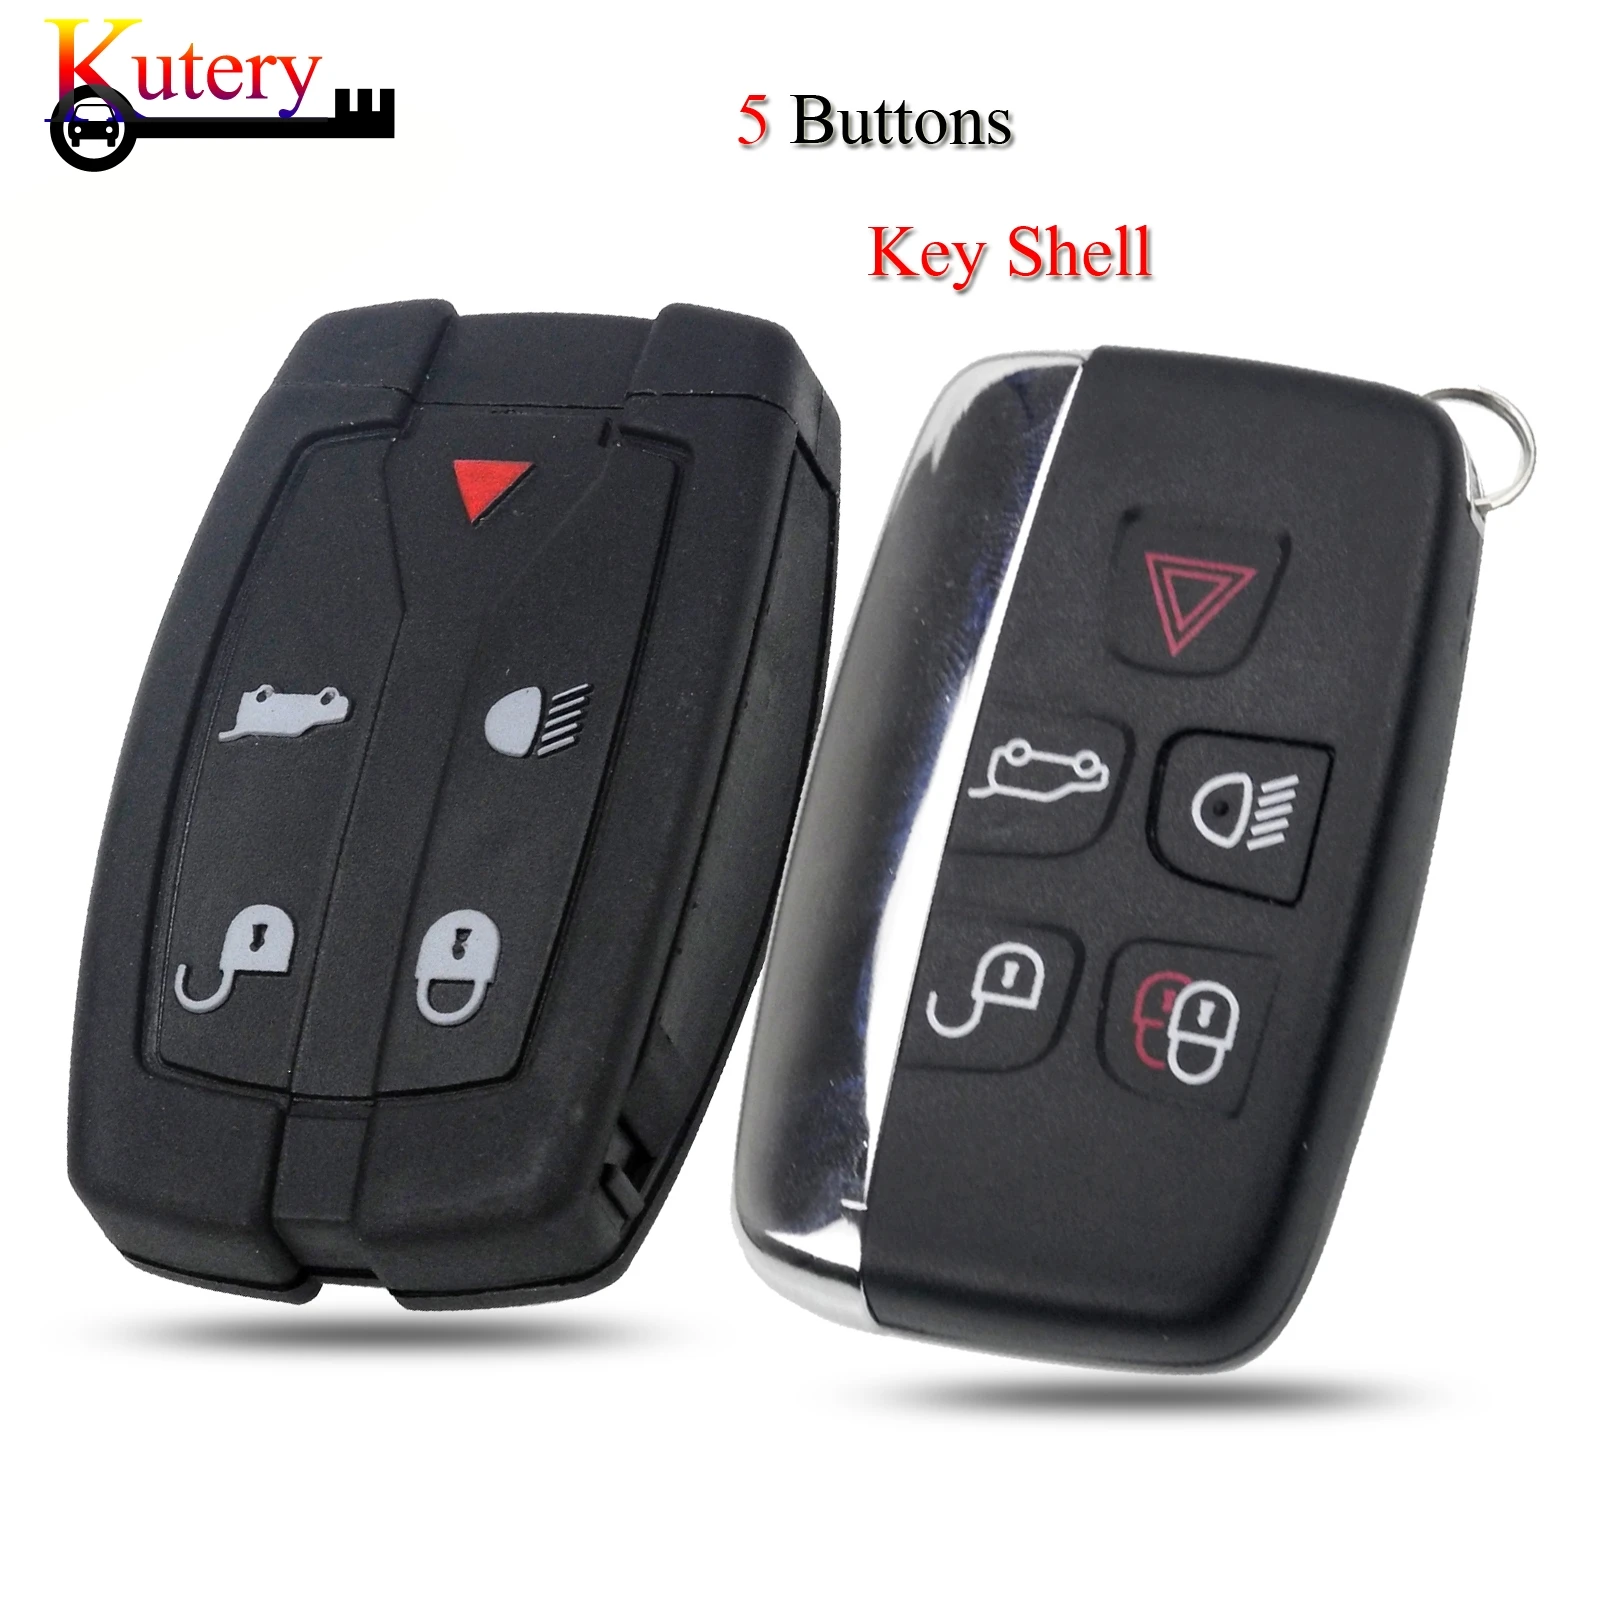 jingyuqin Remote Car Key Shell For Land Rover Freelander 2 3 for Ranger Rover Evoque Discovery 4 5Buttons Case Fob Cover